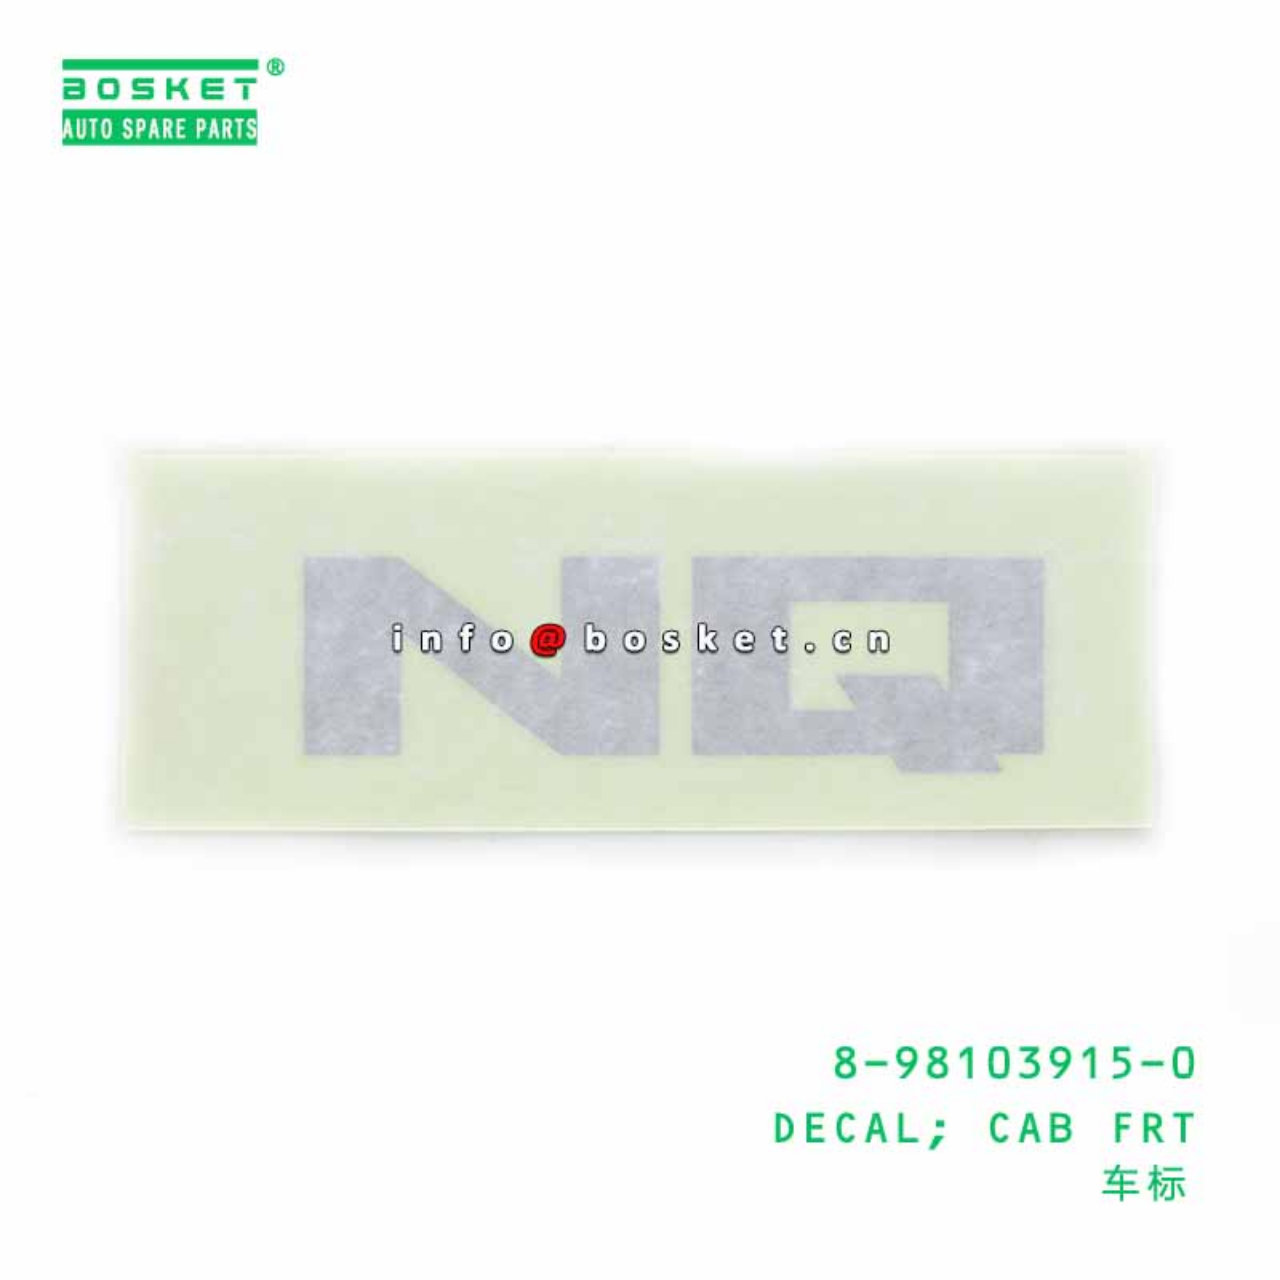 8-98103915-0 8981039150 CAB FRONT DECAL Suitable For ISUZU NQR NPR